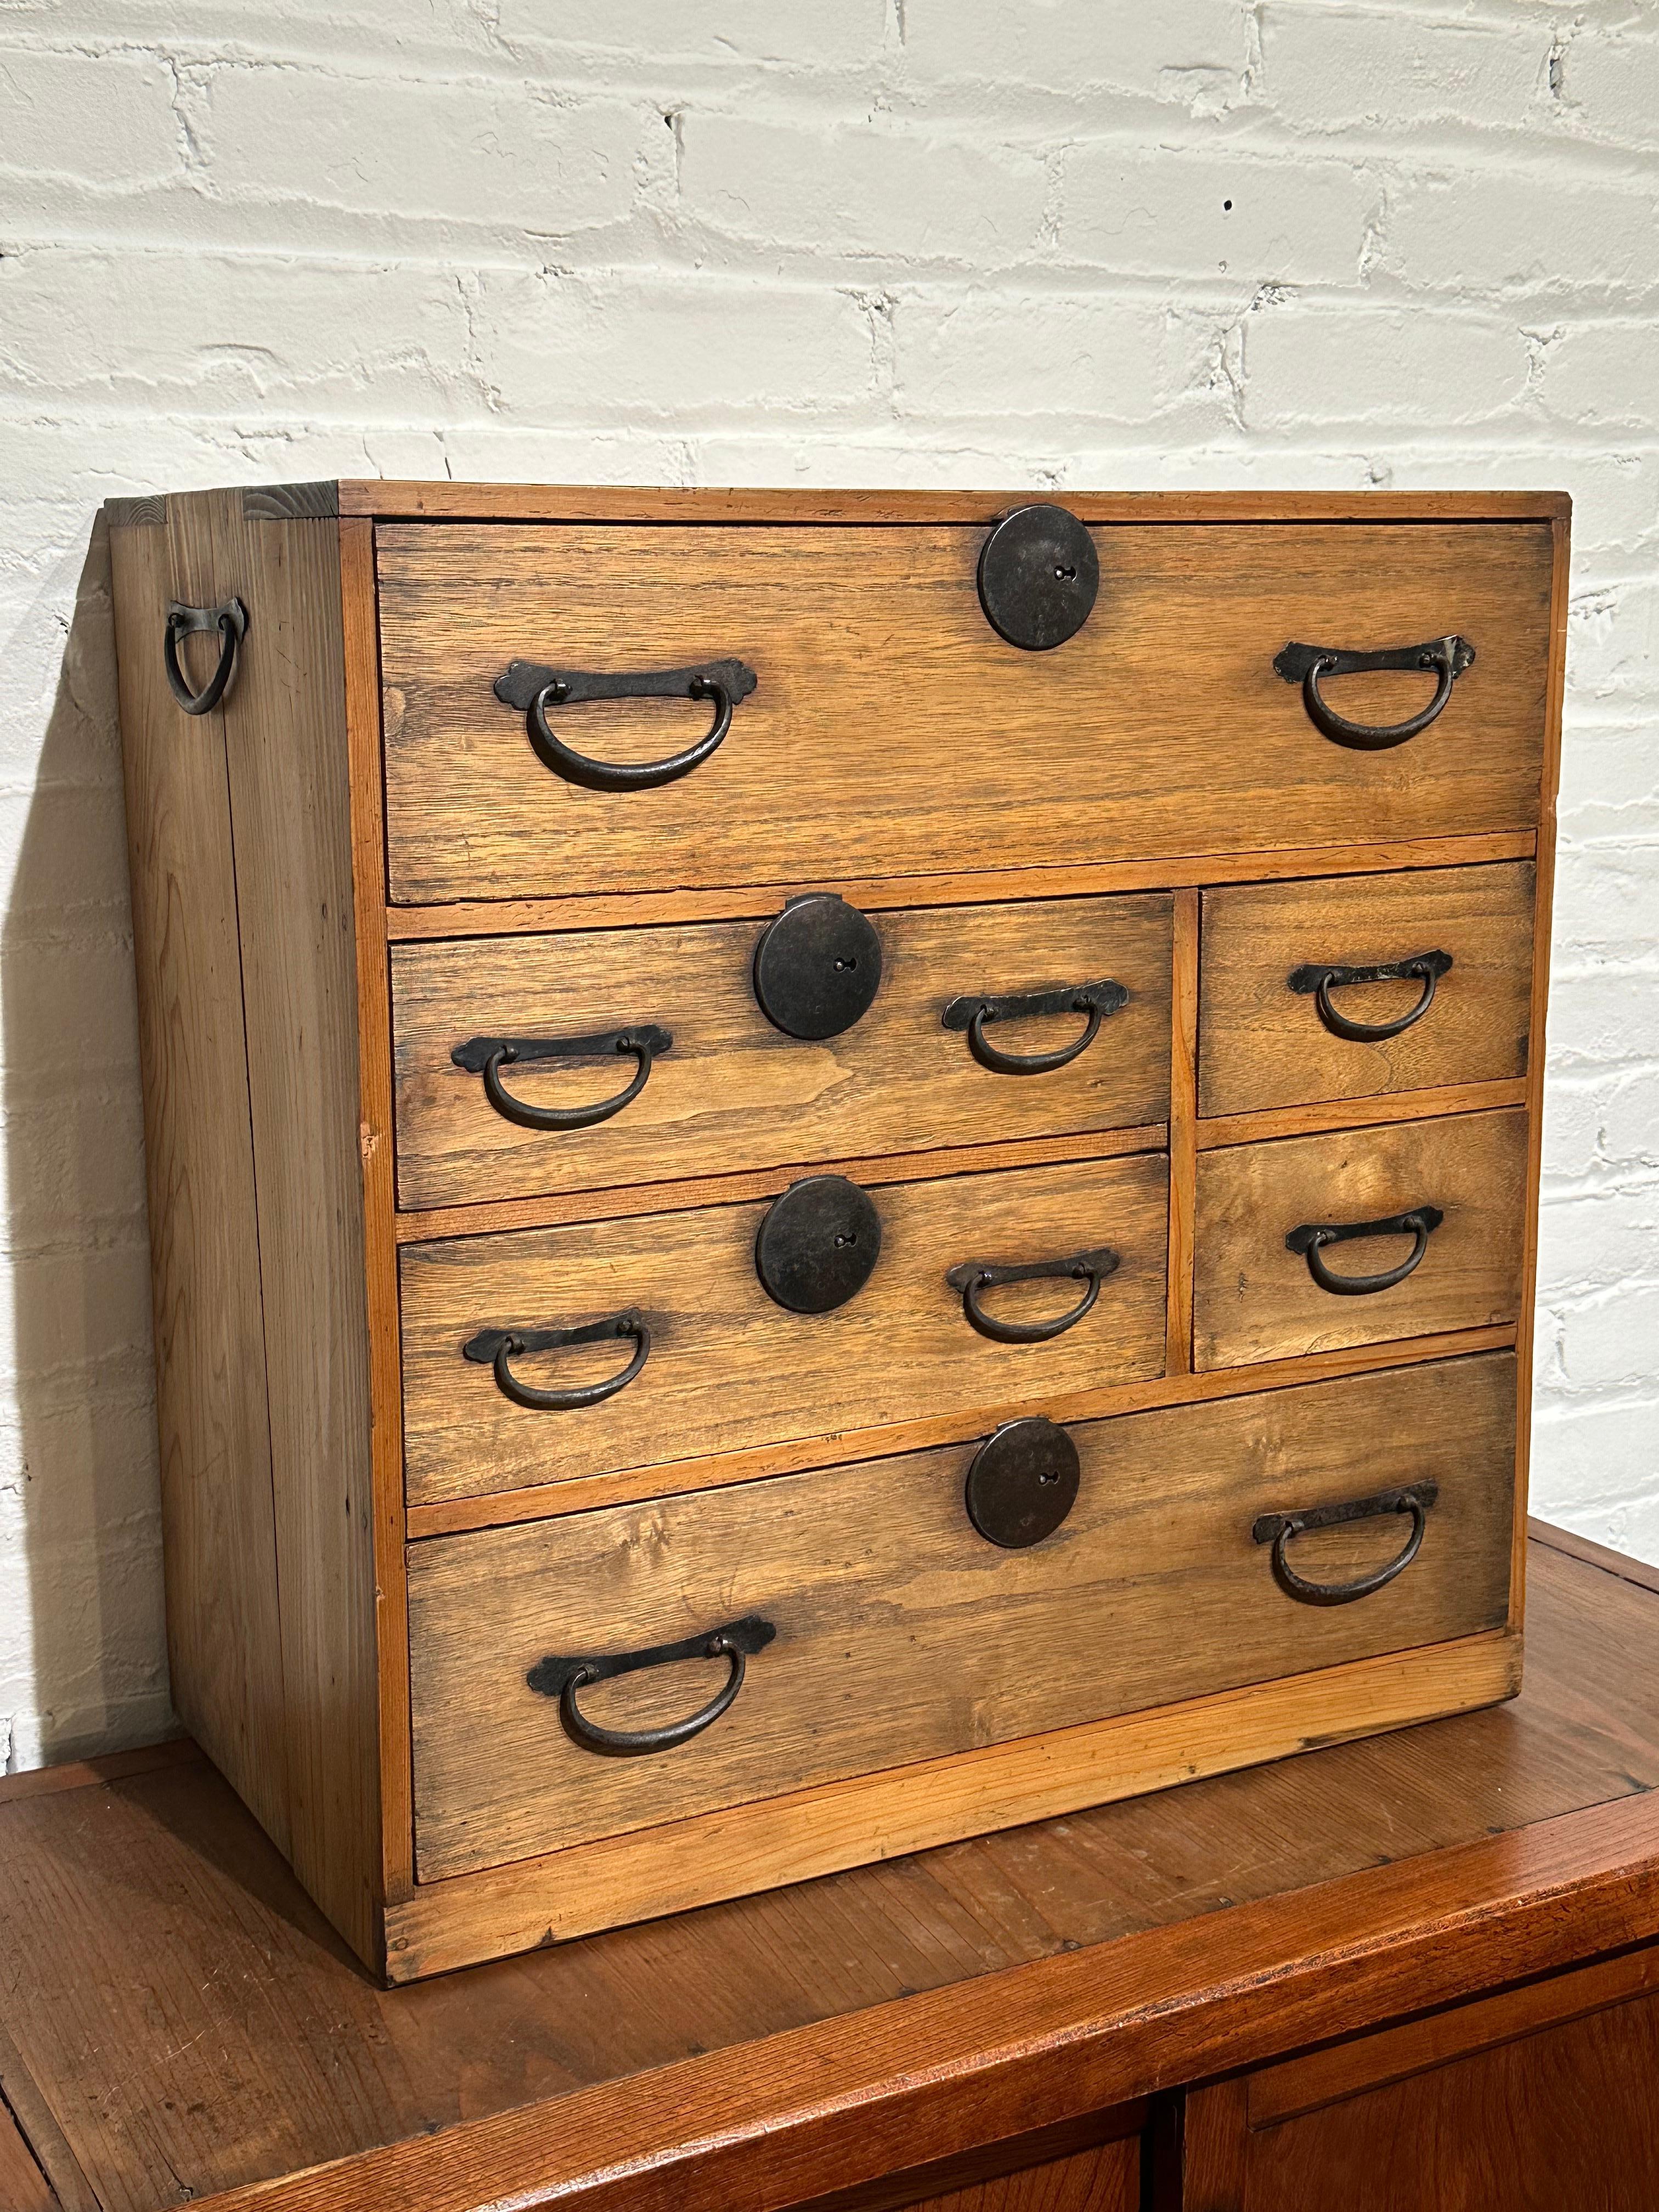 Available from Shogun's Gallery in Portland, Oregon for over 40 years specializing in Asian Arts & Antiques.

This is an antique Japanese tansu known as a kodansu. this tansu chest was made and used over 100 years ago years ago in the late Meiji Era